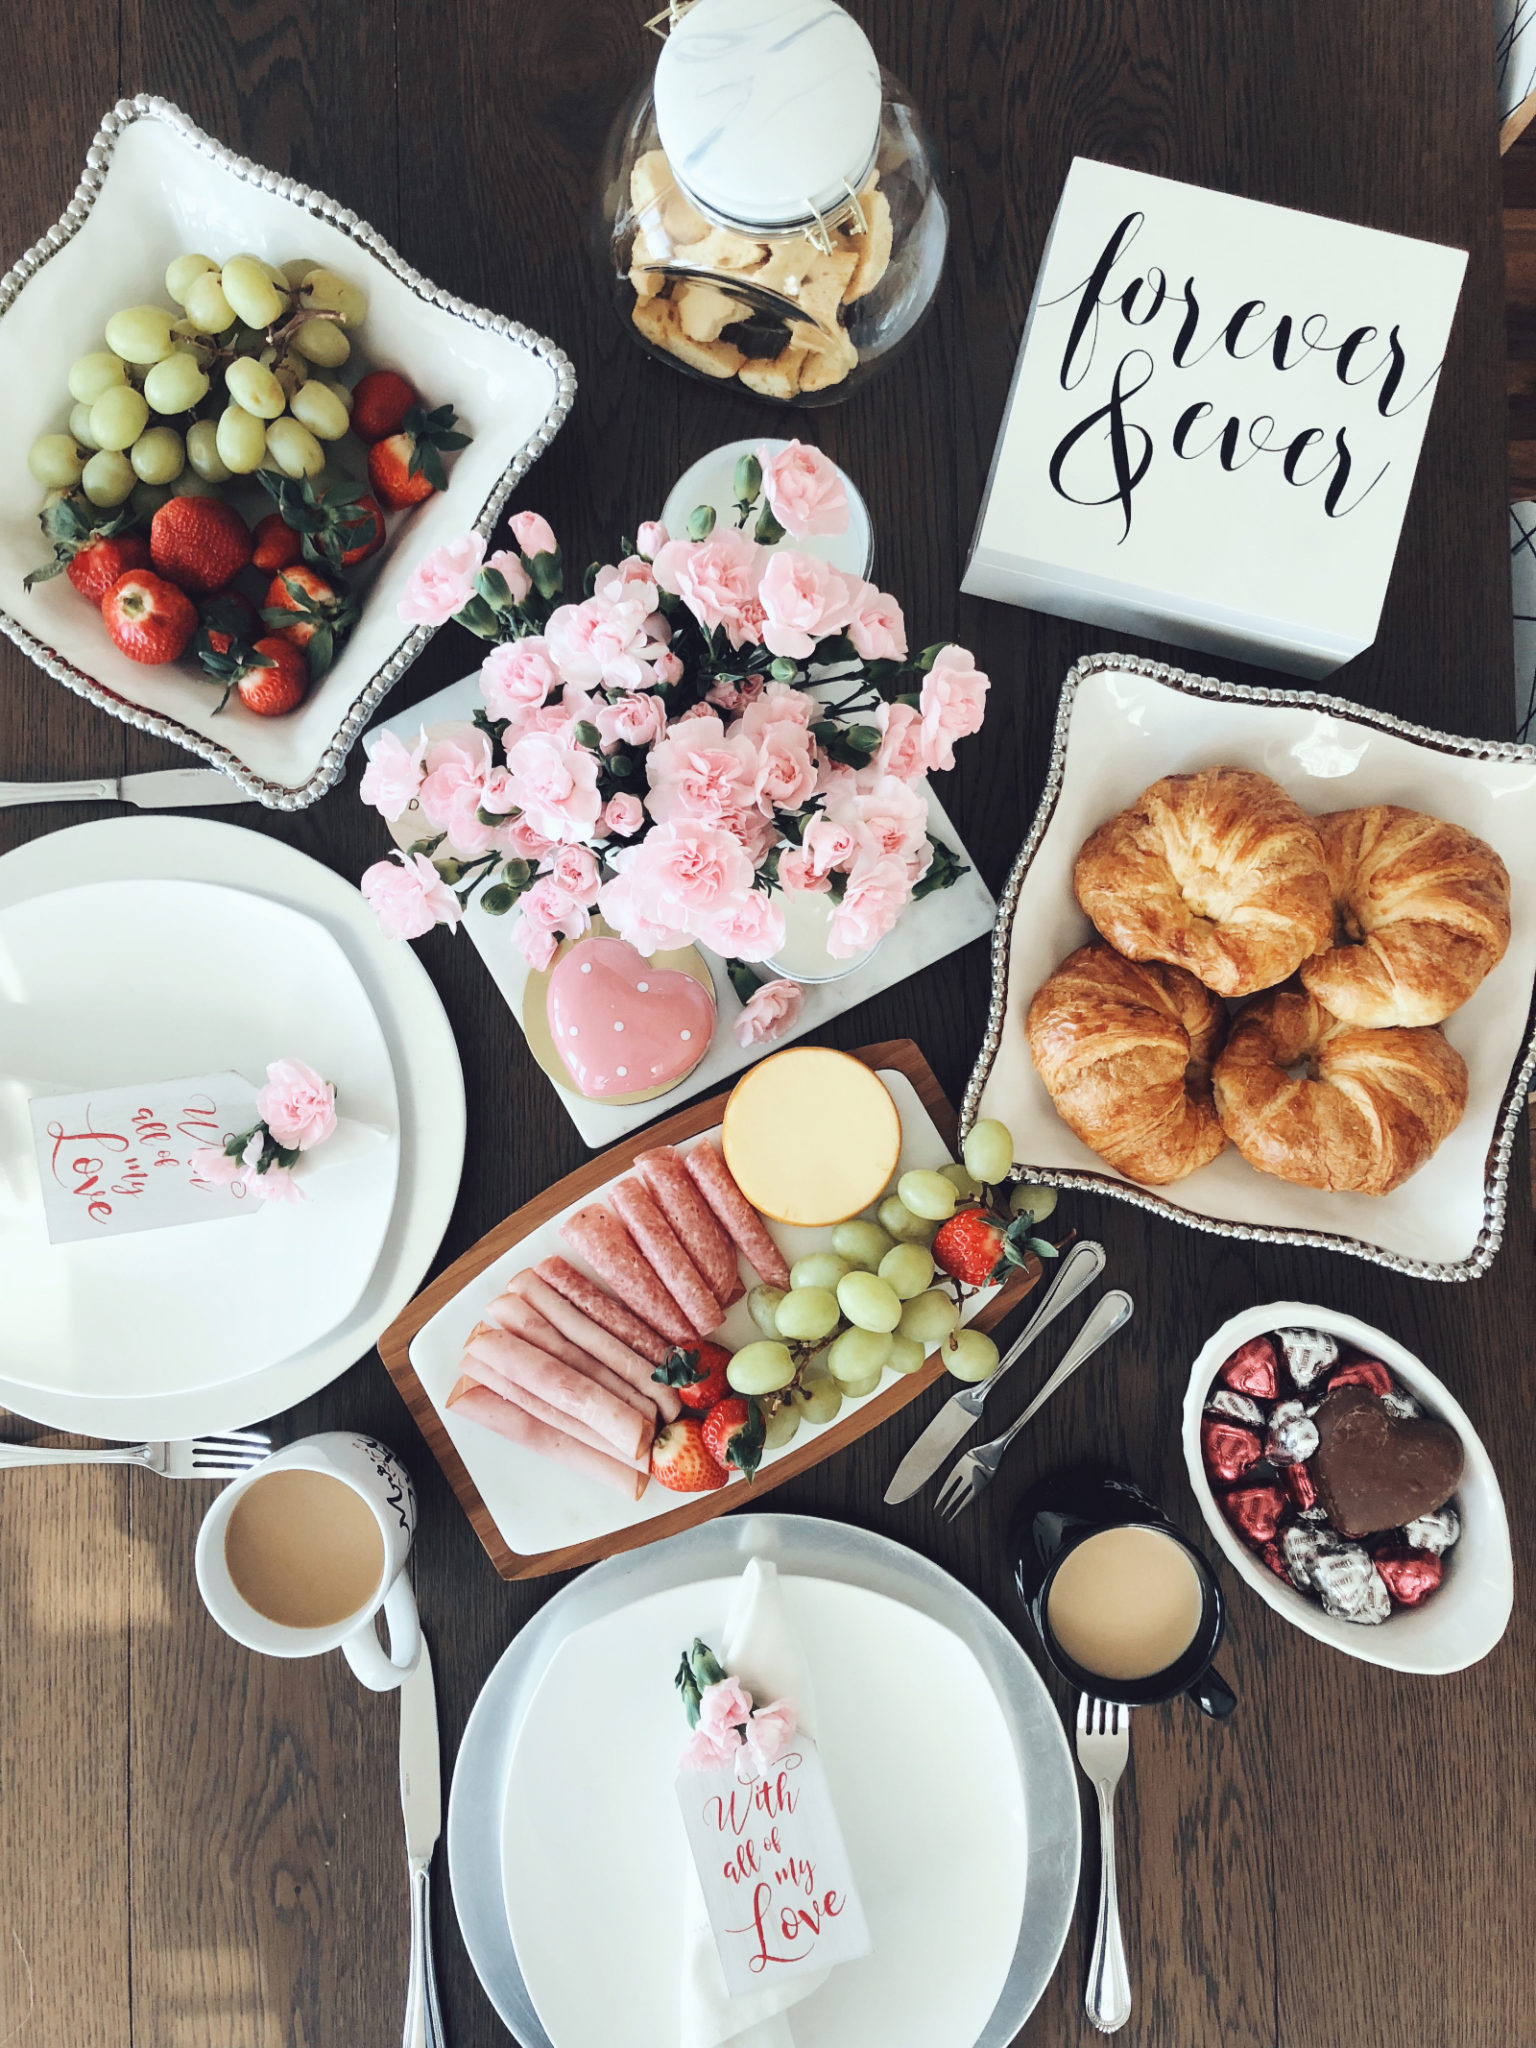 How to make saint valentine's day special again - HOW TO  ORGANIZE THE PERFECT SAINT VALENTINES  DAY BRUNCH by popular lifestyle blogger Chic Talk